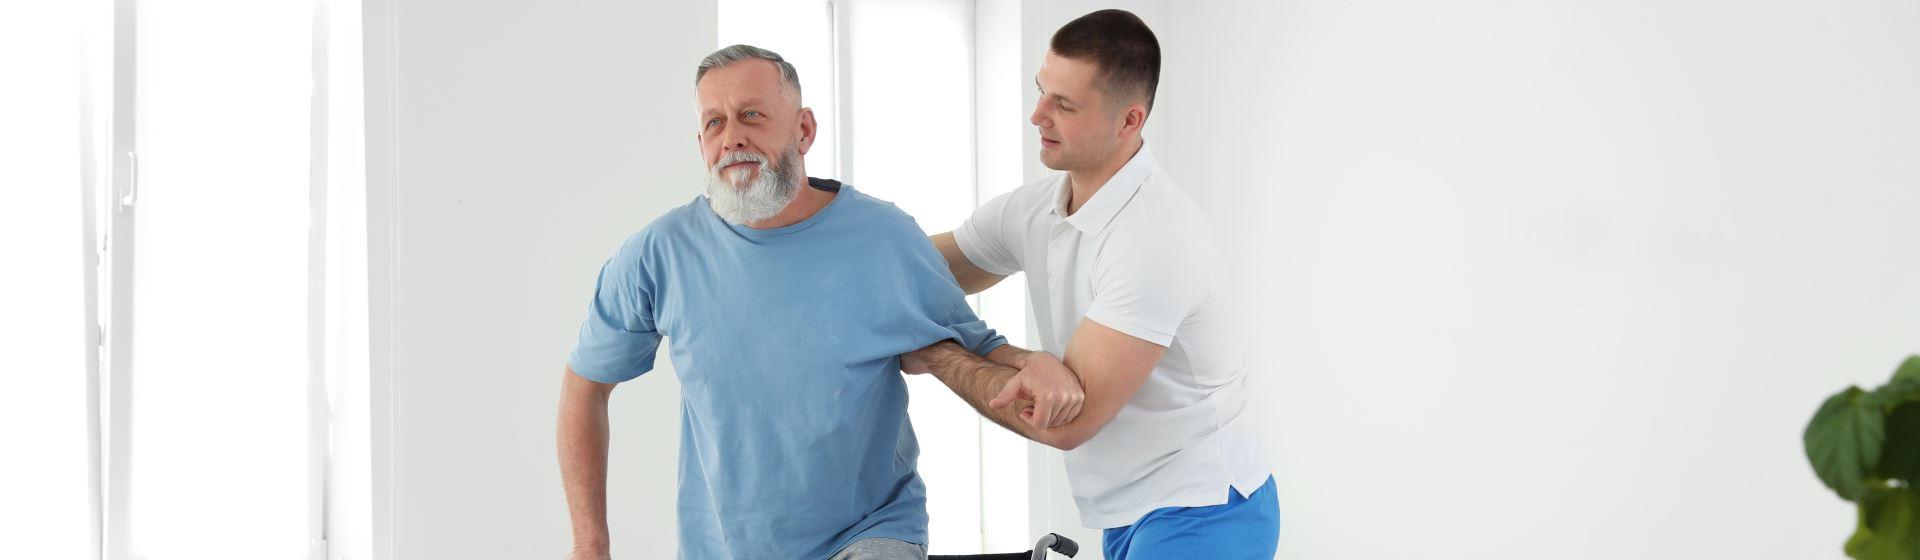 Professional physiotherapist working with senior patient in rehabilitation center